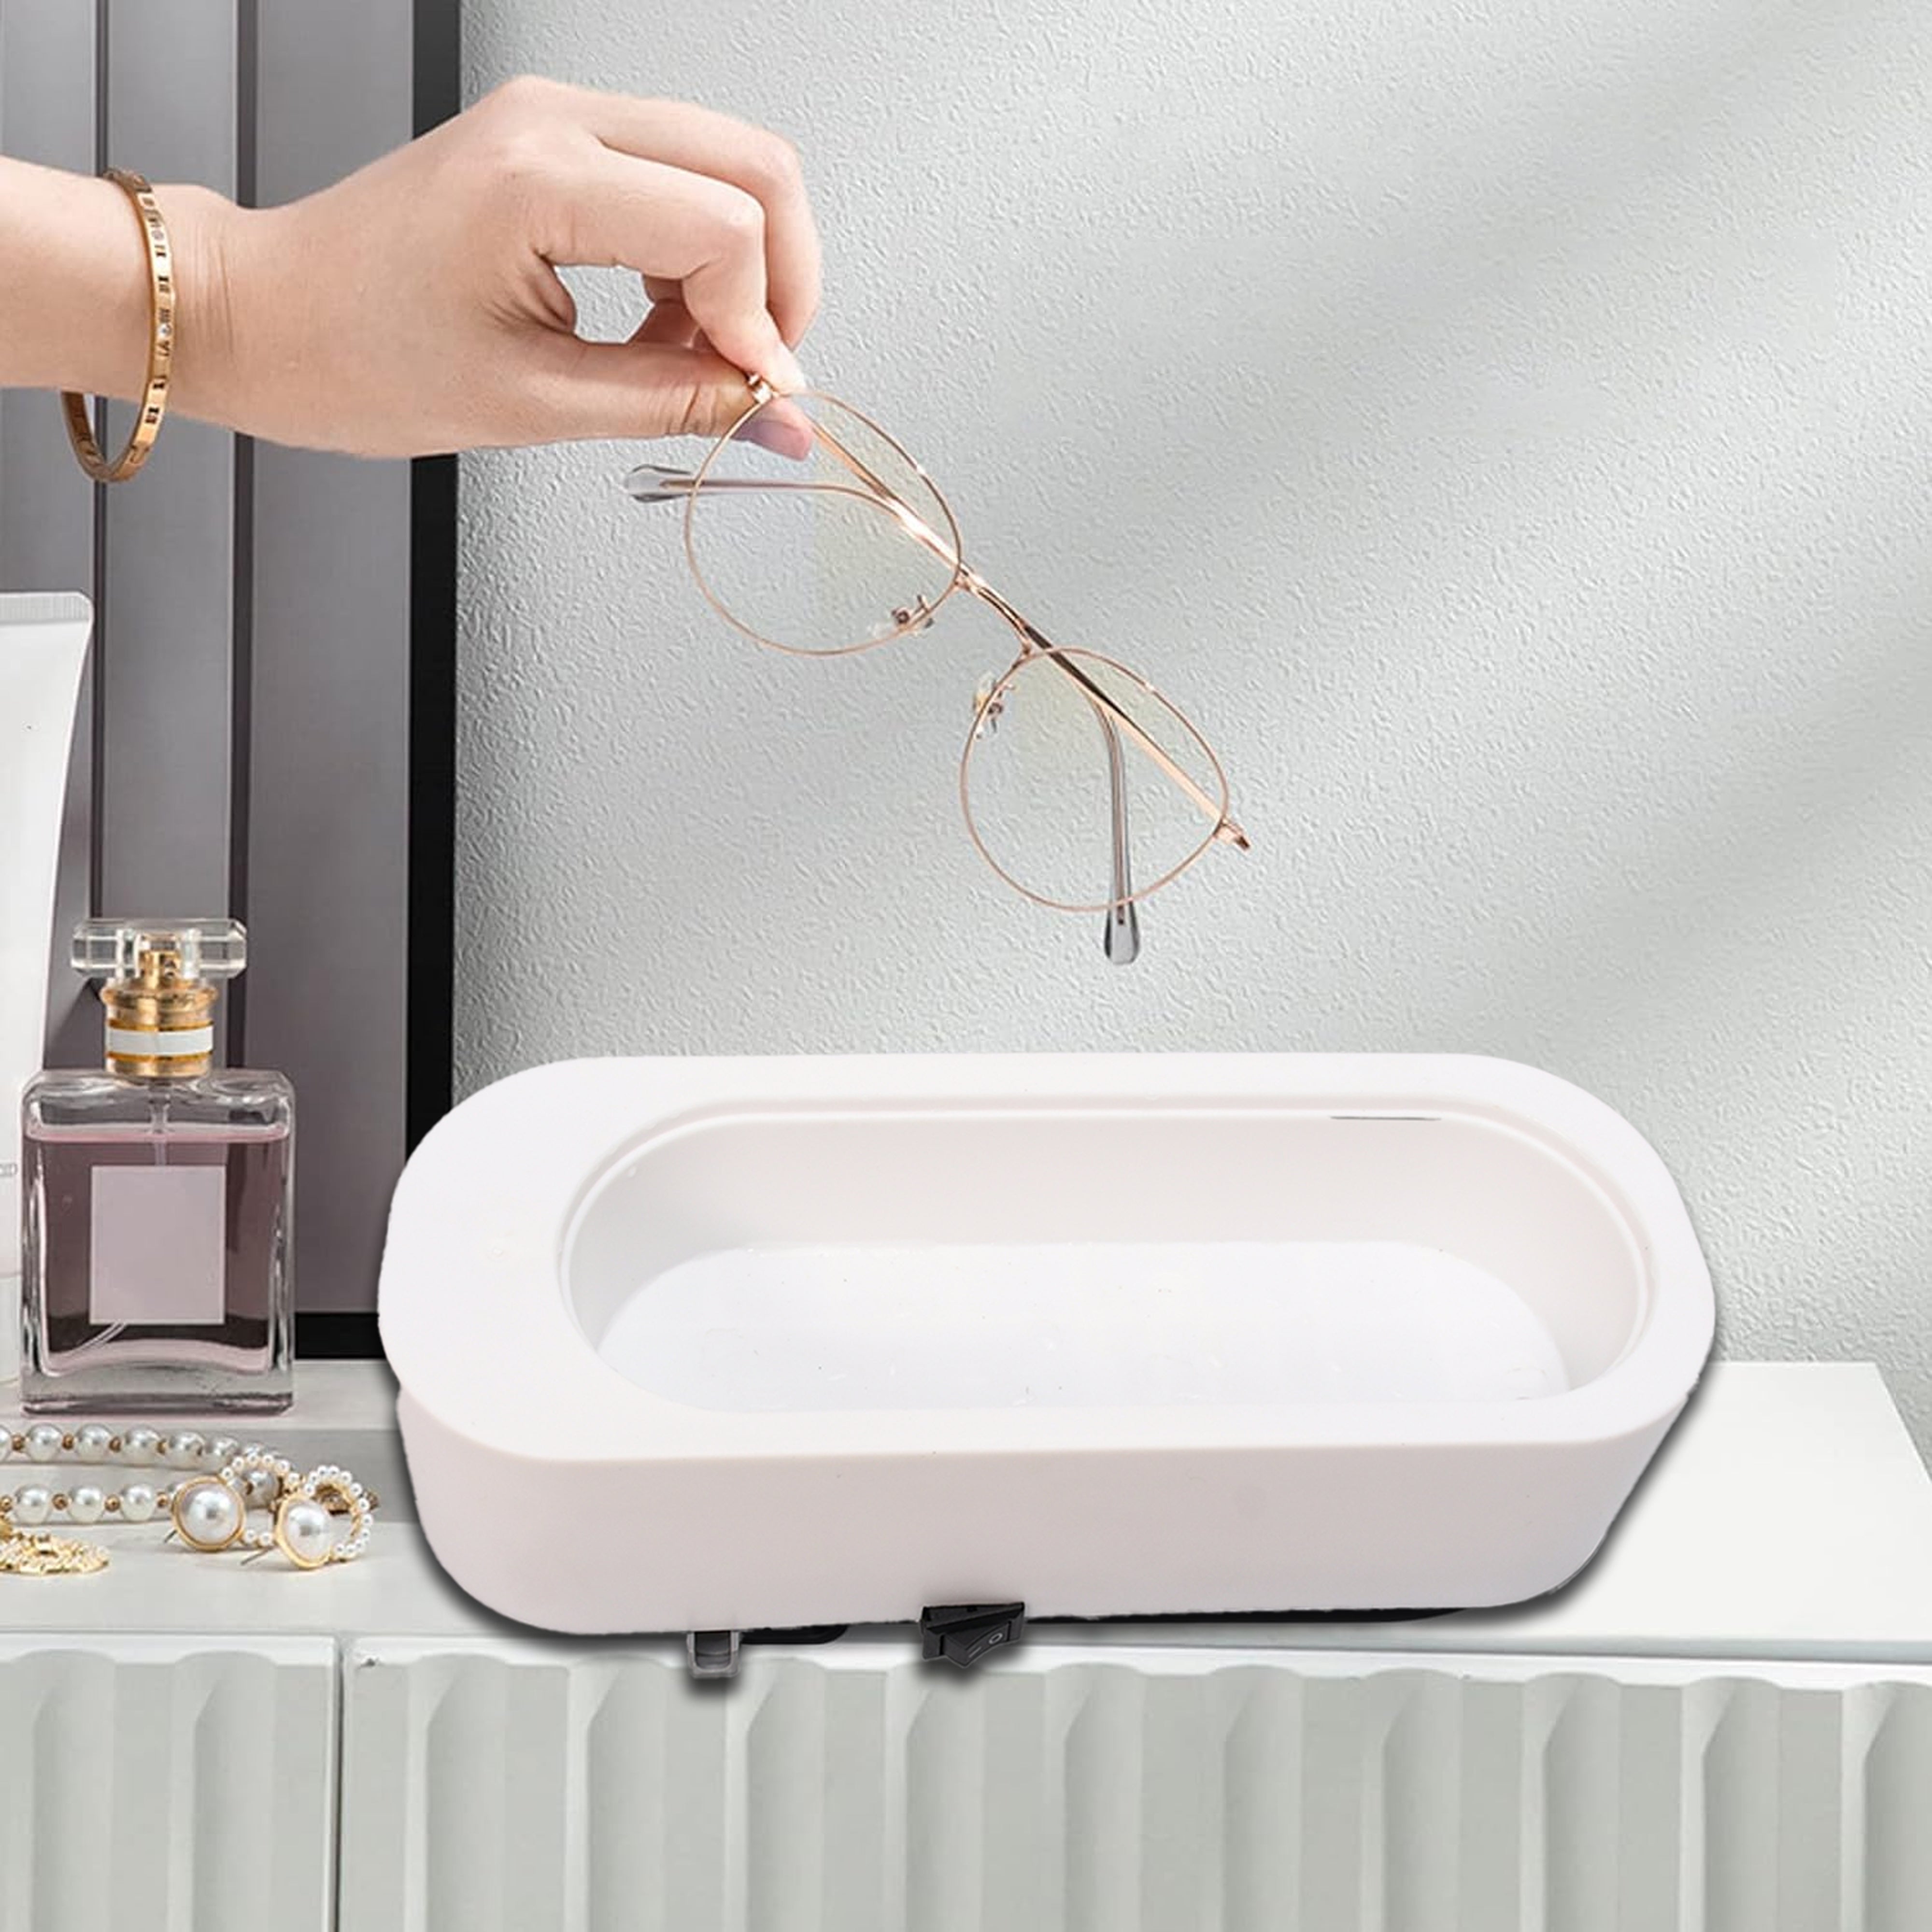 12670 Ultrasonic Jewelry Cleaner Machine Portable Professional Mini Household Sonic Cleaning Machine for Jewelry, Necklaces, Dentures, Eyeglasses, Watches, Watch Strap, Rings, Retainer, Coins Ultrasonic Vibration Machine (Battery Not Included)